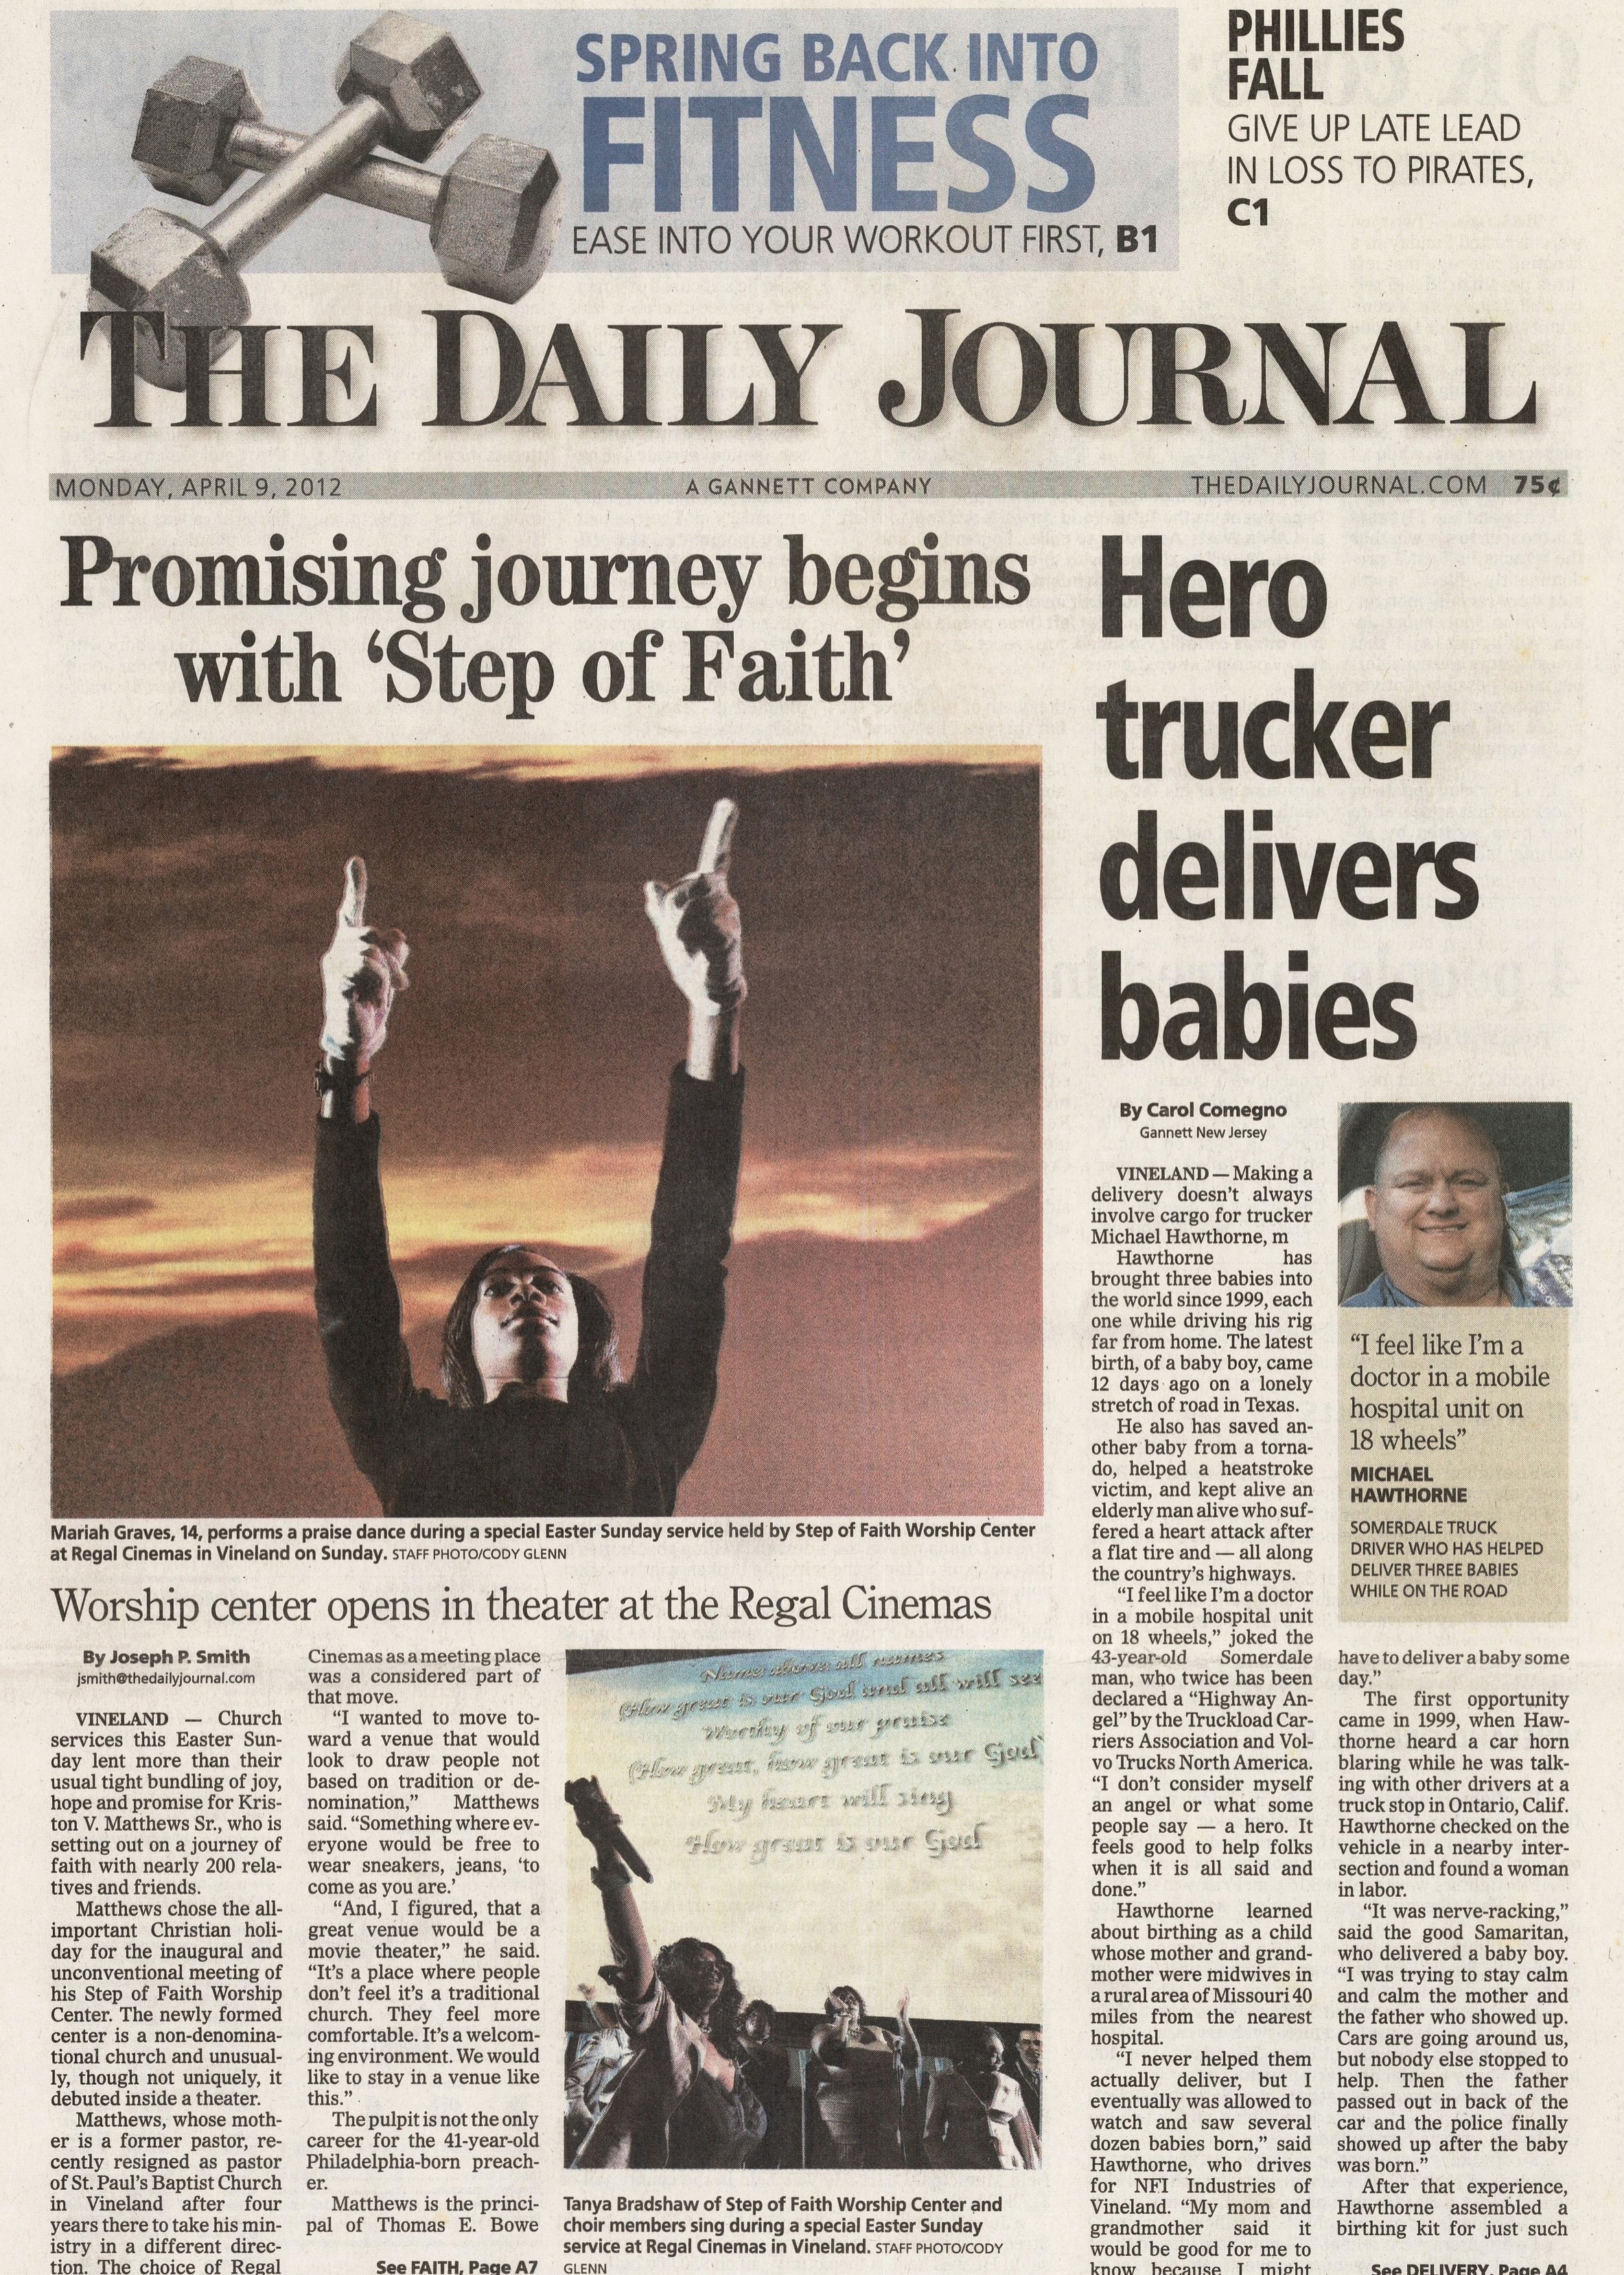  Cinema transformed to a worship center in Vineland April 9 2012 /  The Daily Journal  